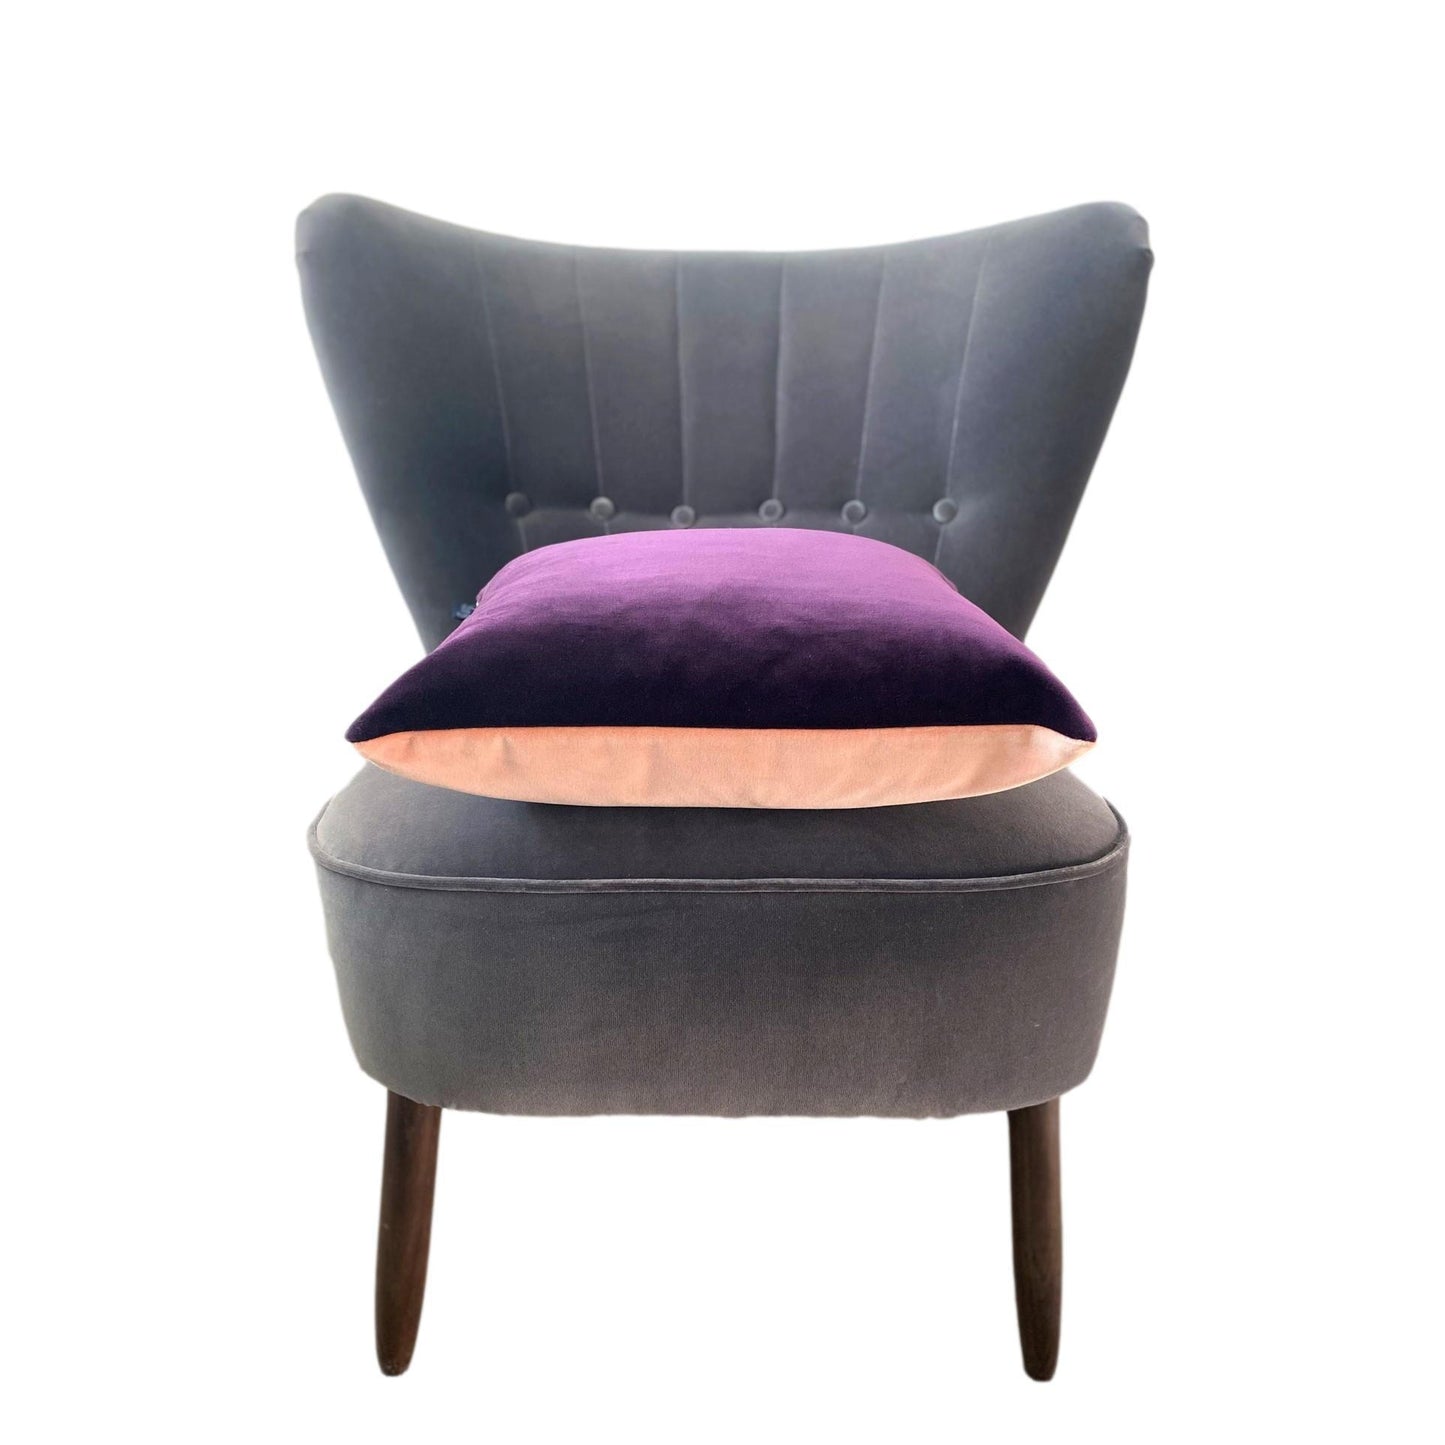 Plum Cushion with Blush Pink-Luxe 39